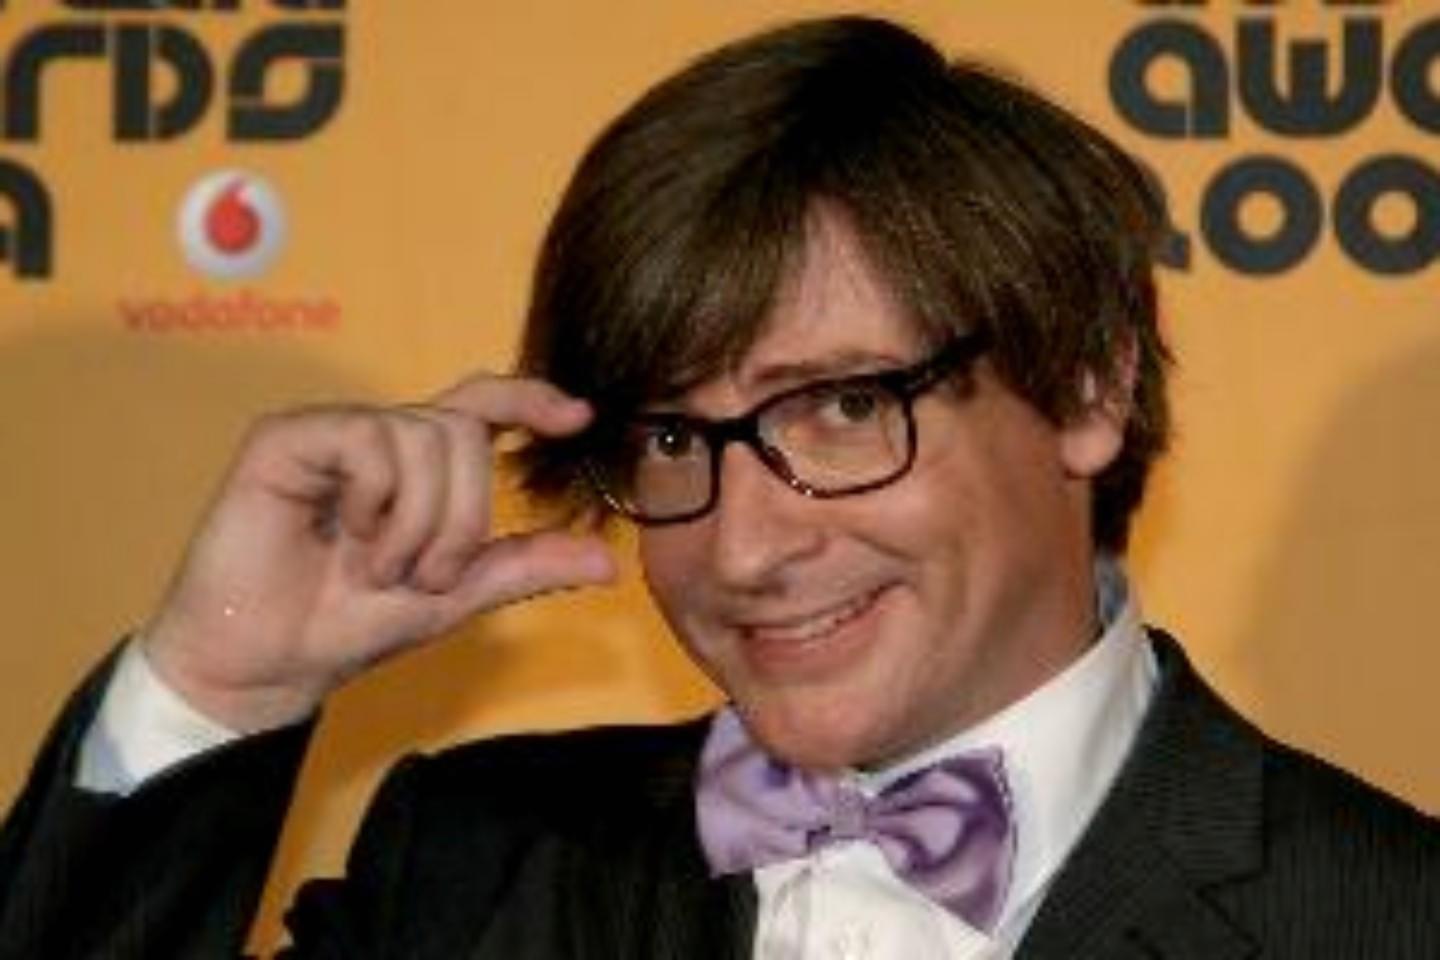 Rhys Darby Tickets Buy or Sell Tickets for Rhys Darby Tour Dates